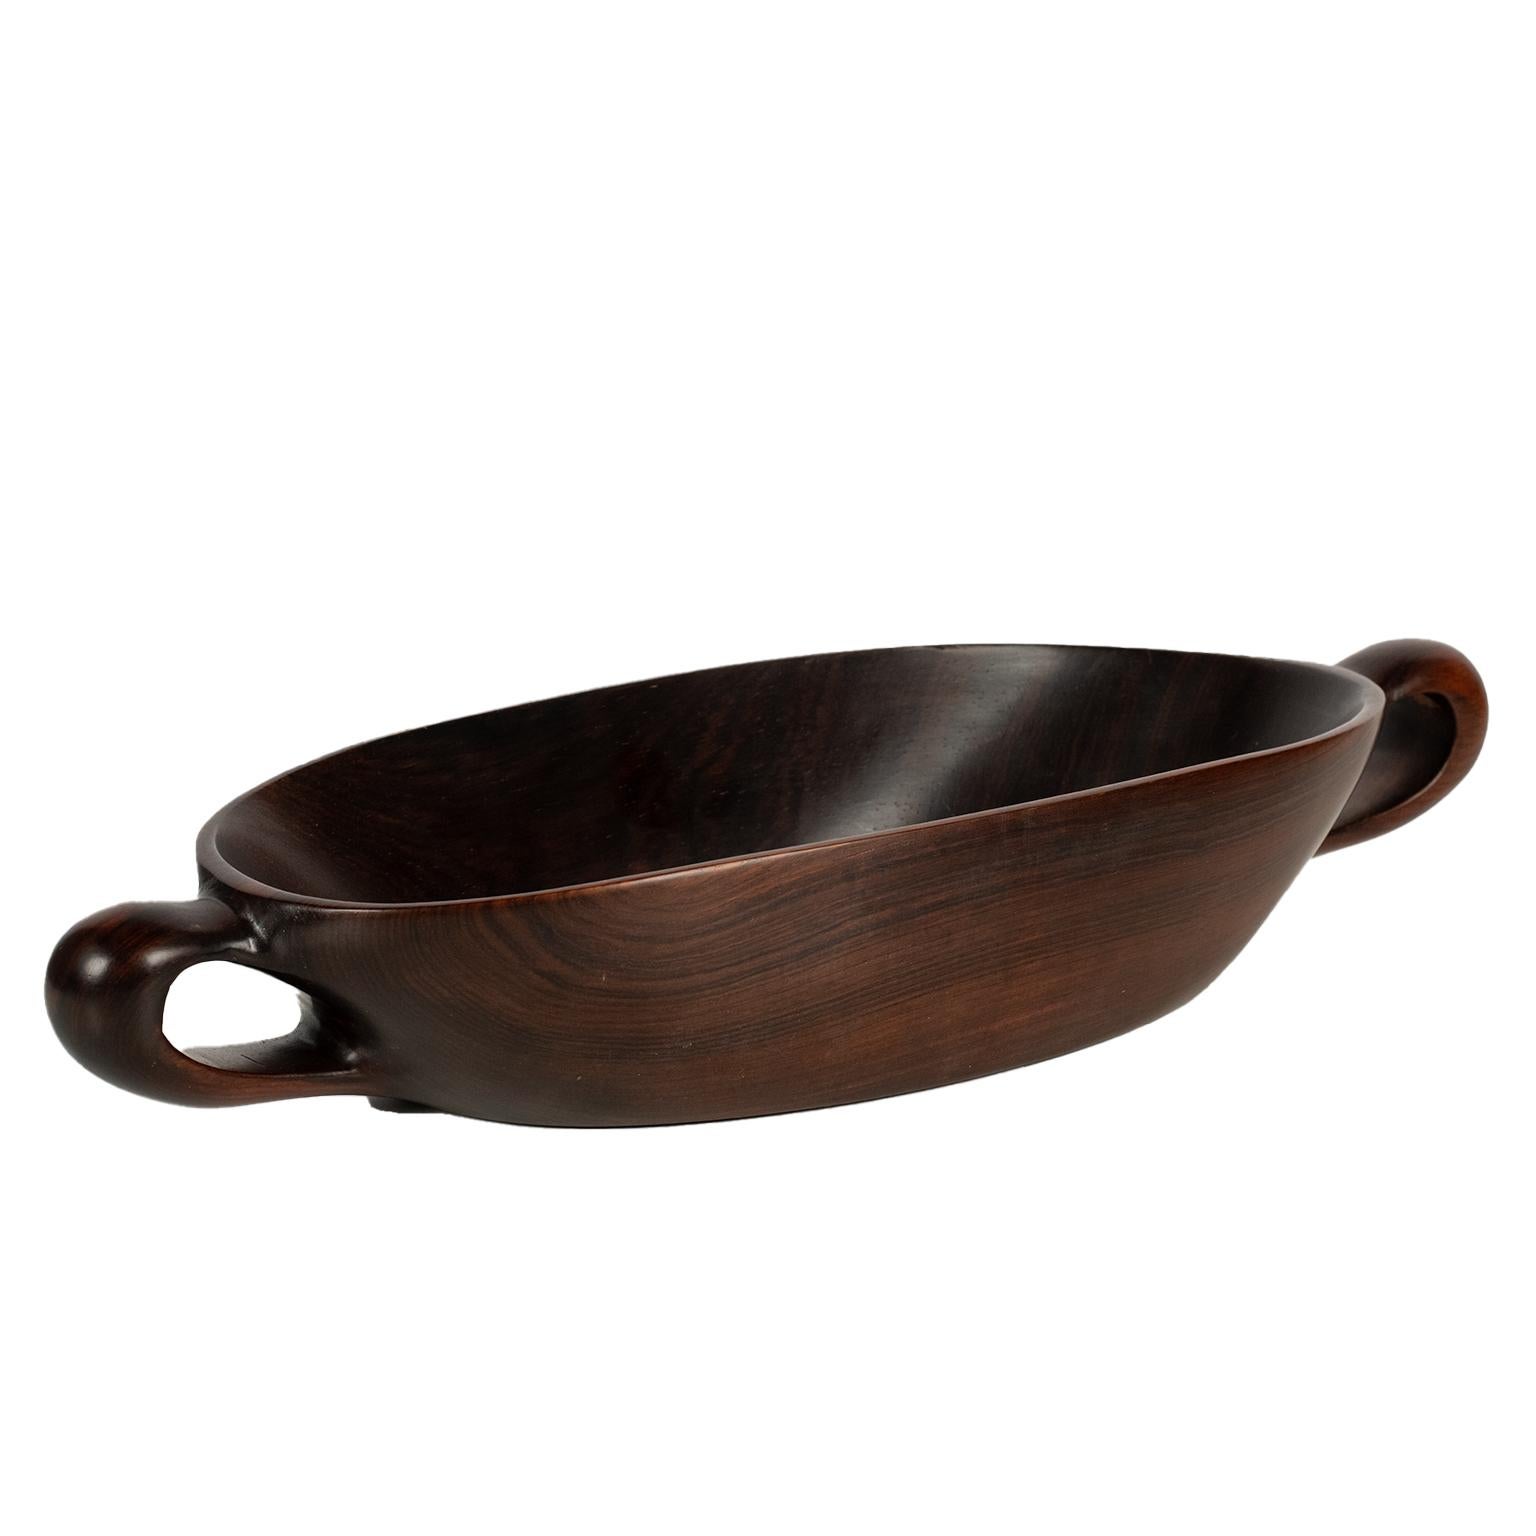 This is a masterful, smooth, exotic and beautifully hand carved Jacaranda wood bowl by Brazillian design icon Jean Gillon for Wood Art. It bears its original production label classifying it as 1/505. A rare beauty and perfect collectible for those